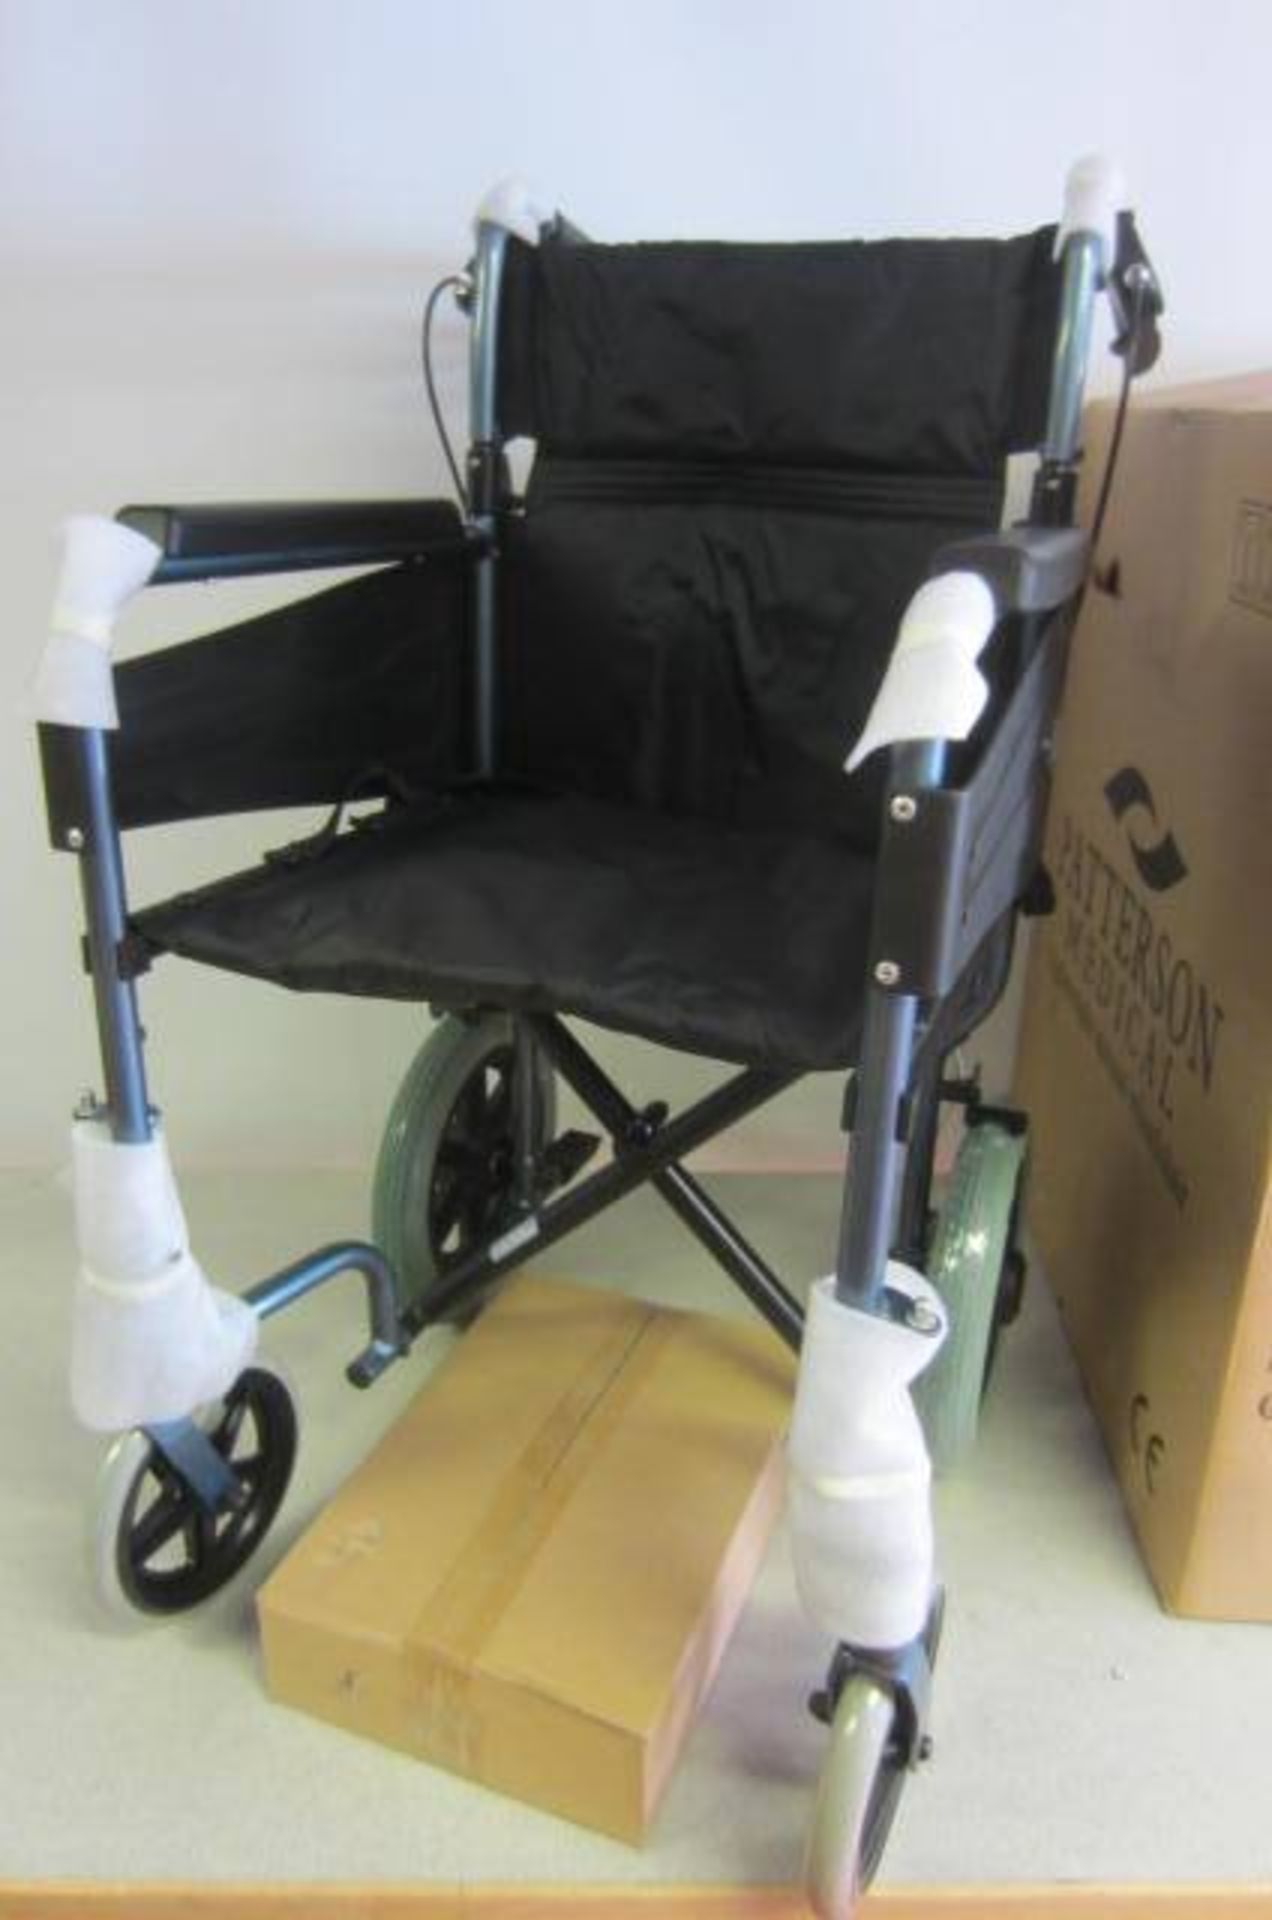 Days Patterson Medical Escape Lite Transit Wheel Chair, Model 338-S. As New In Box. RRP £275.00 - Image 2 of 3